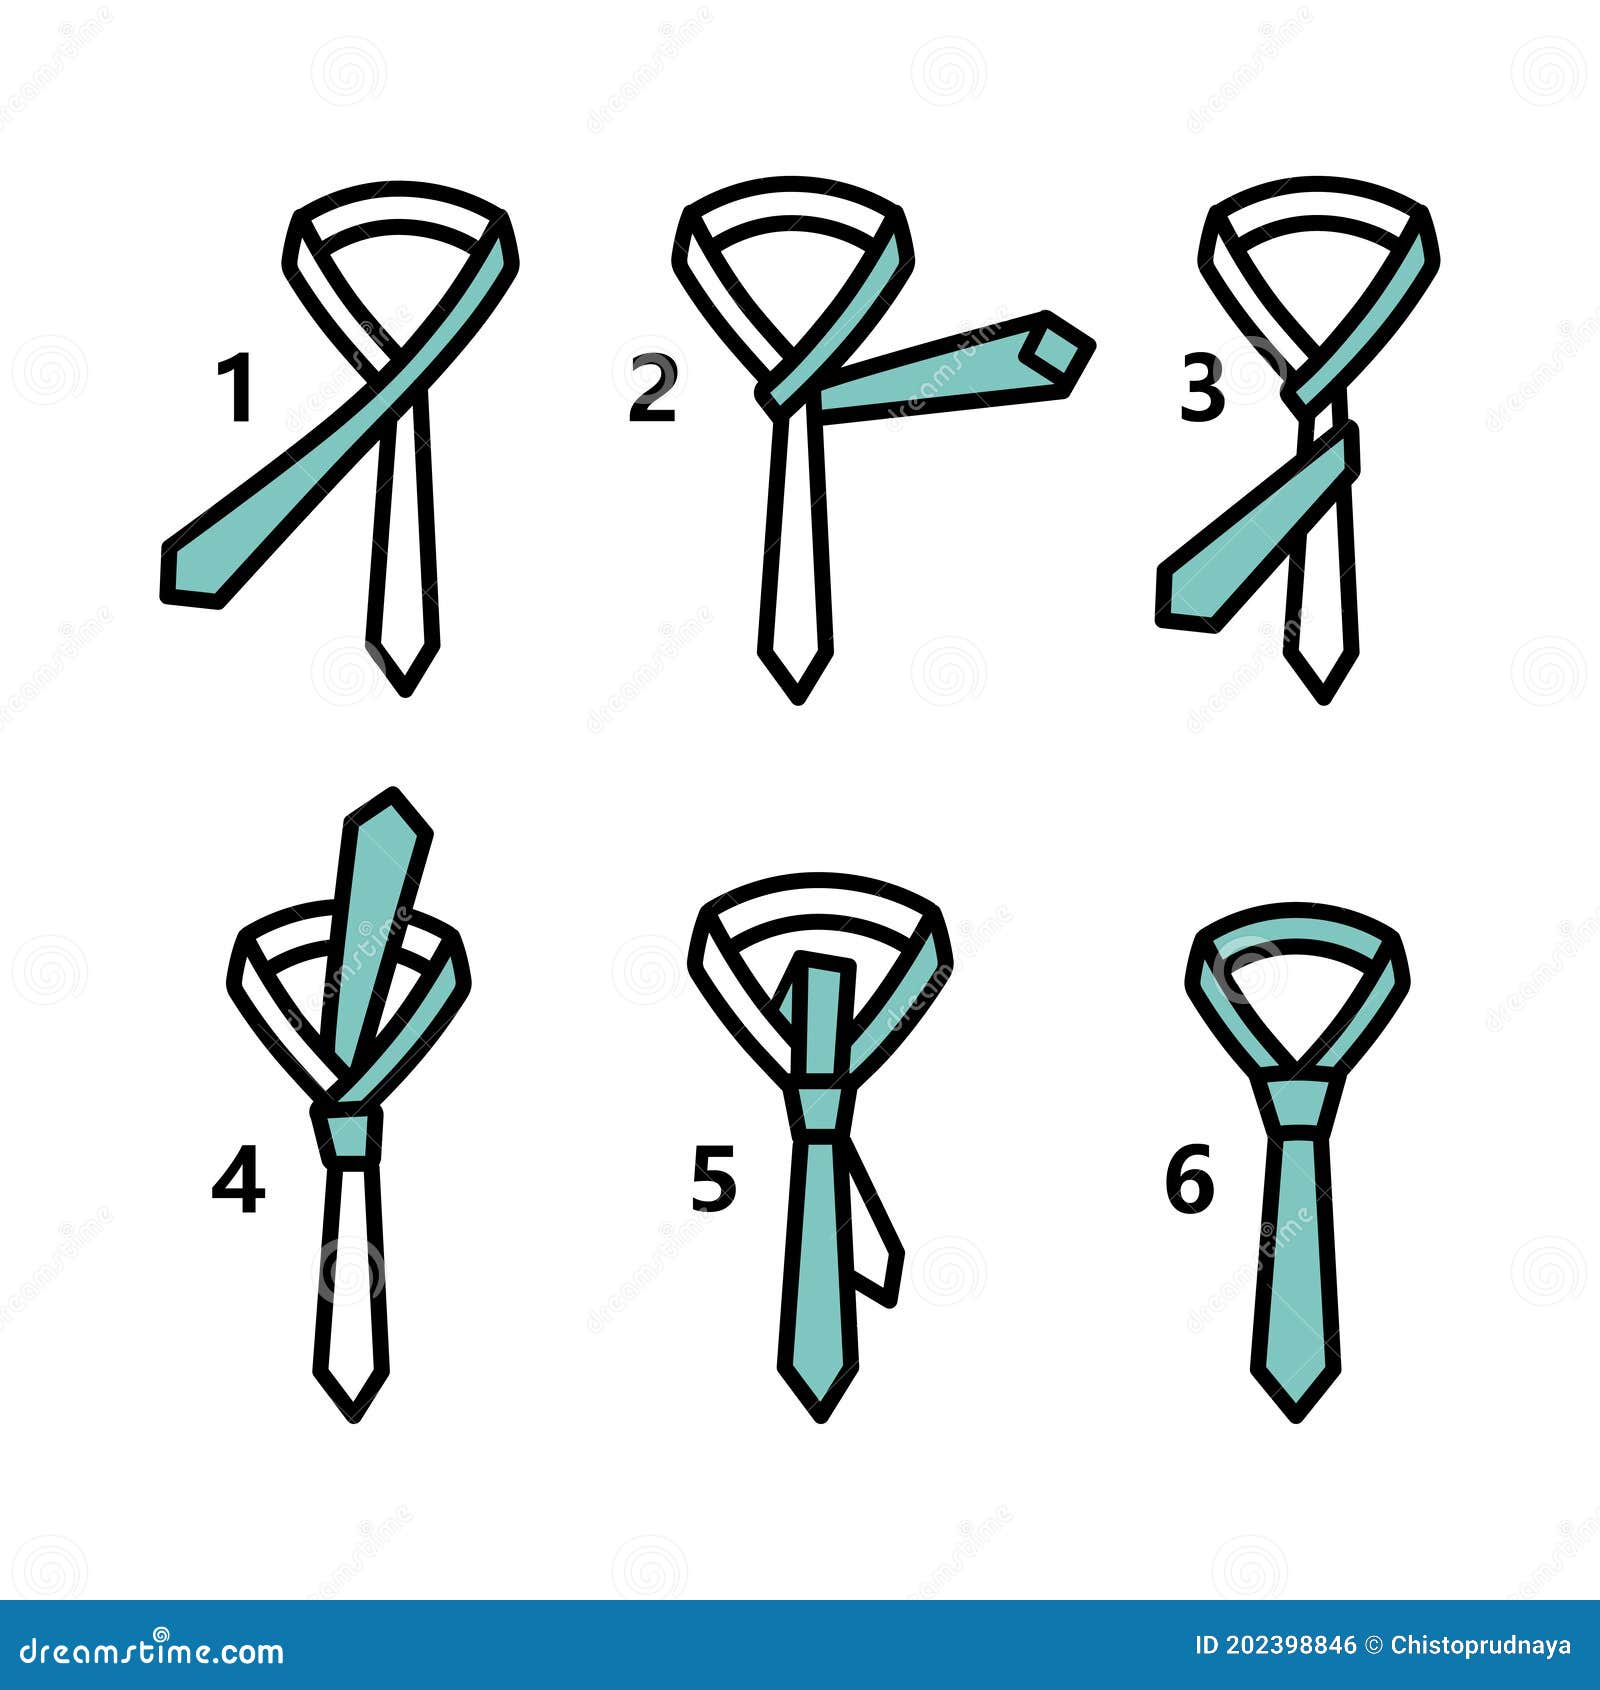 3 Easiest Tie Knots for Beginners - Step-By-Step Instruction